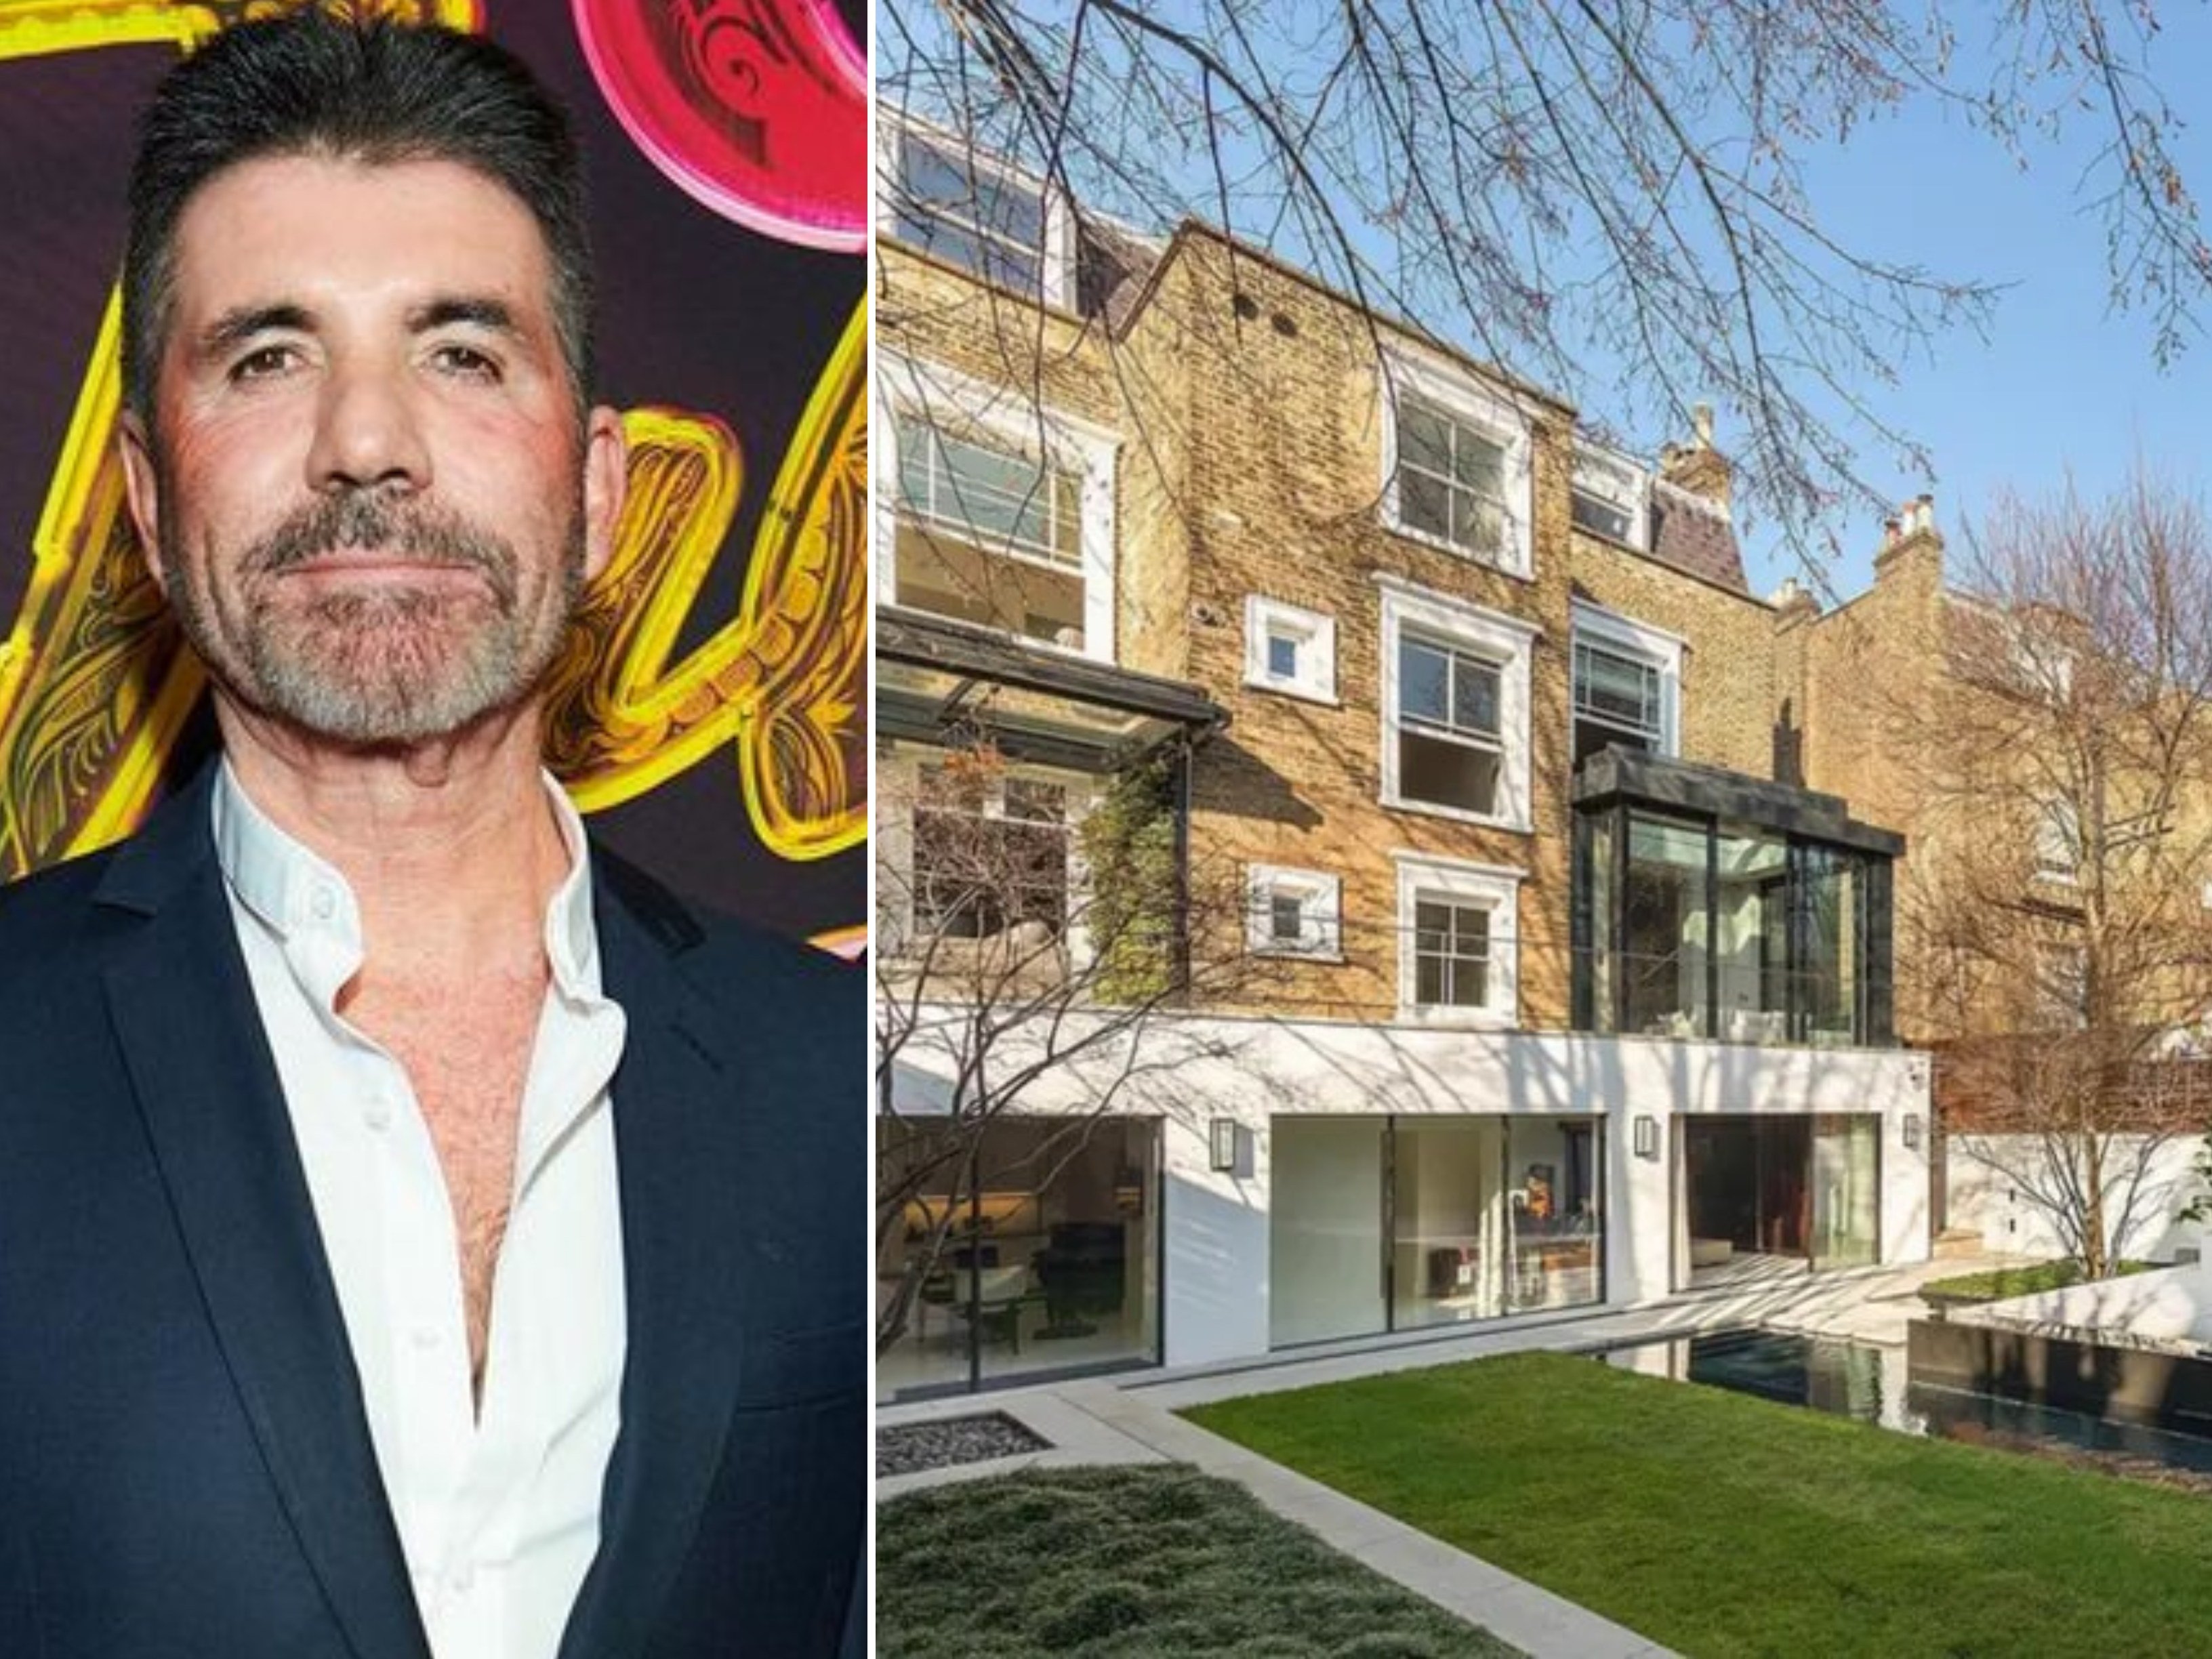 Simon Cowell Moved Out of London for 'Freedom of Country Life': Source